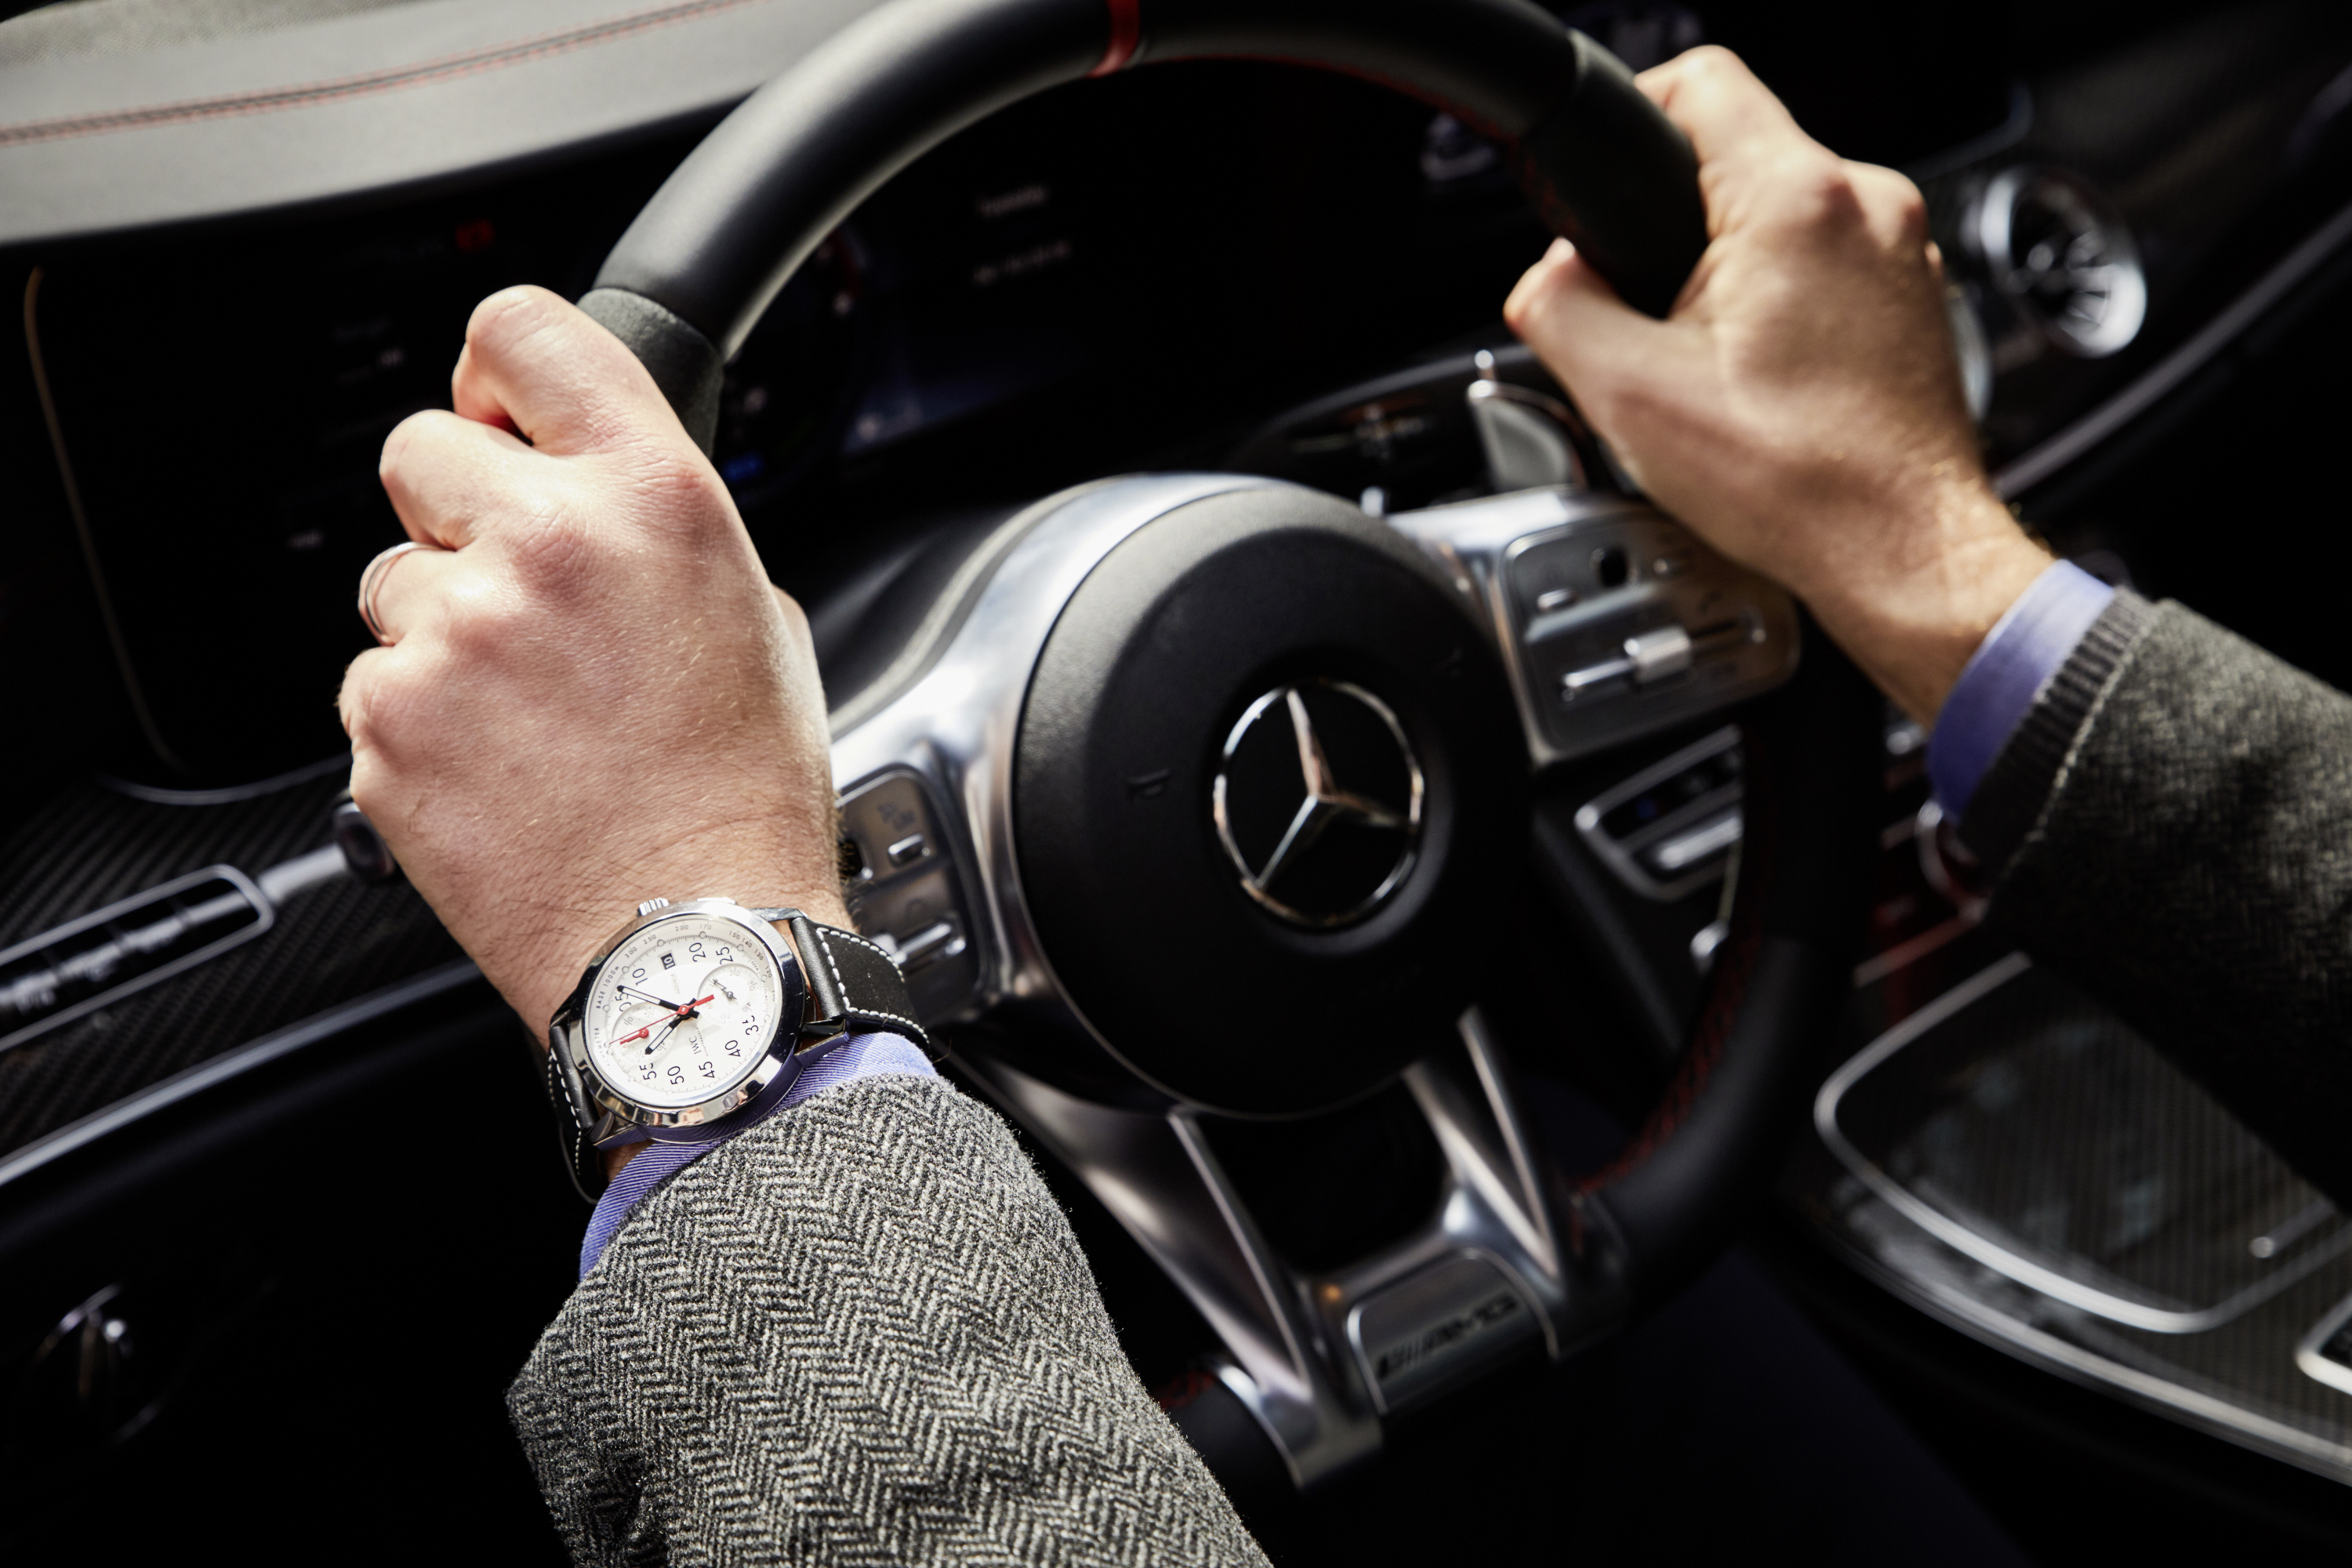 IWC CEO Takes the Driver’s Seat in the New Social Media Campaign by Mercedes-AMG